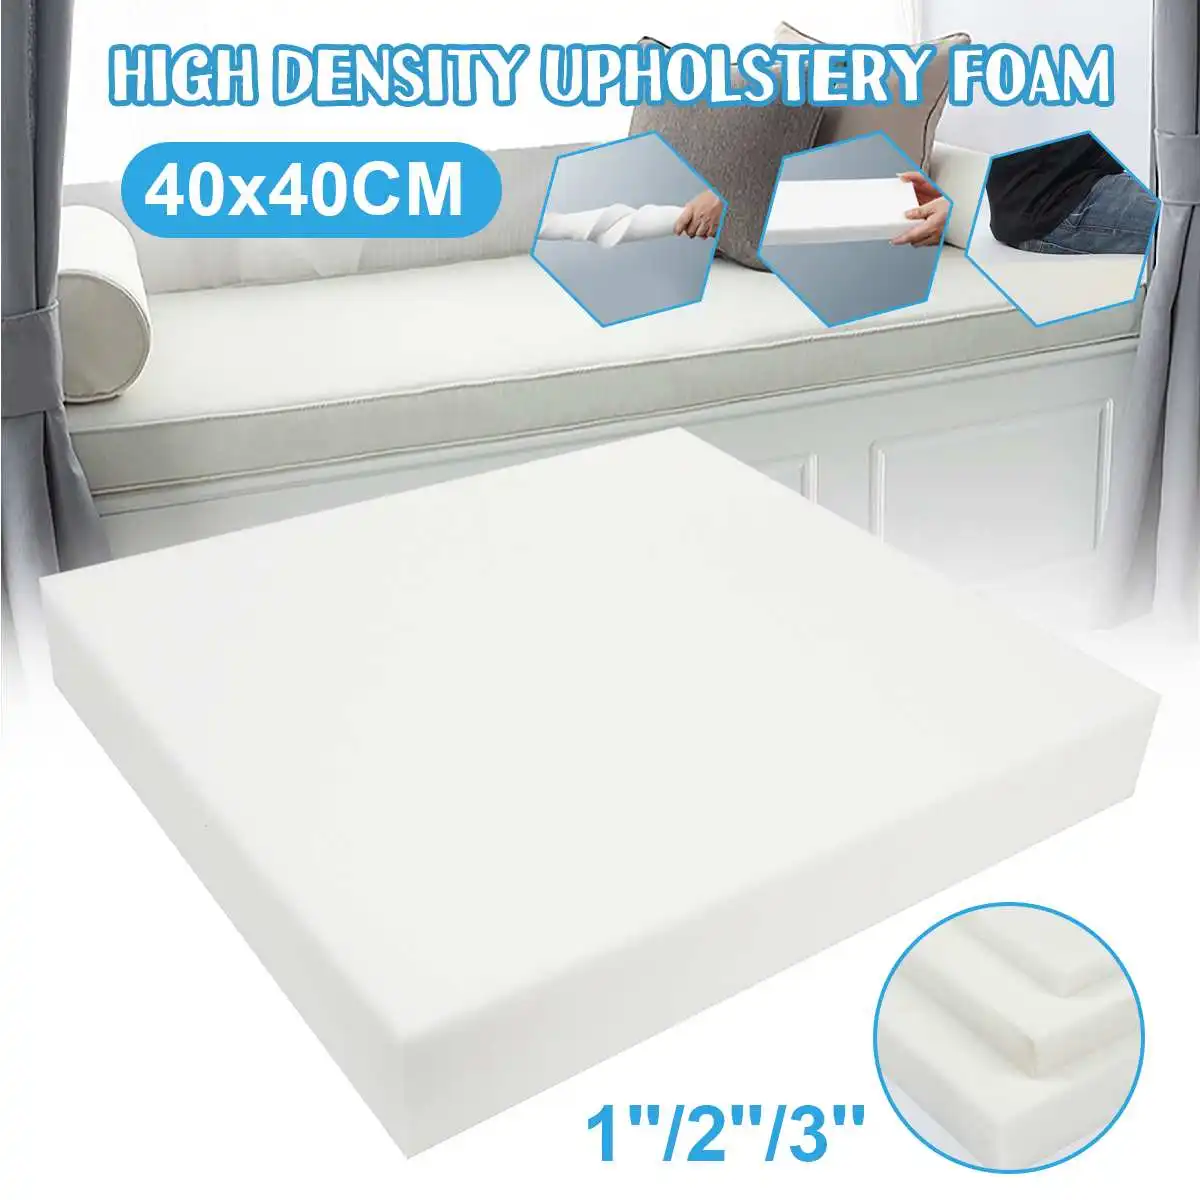 High Density Foam Sheets Cushions Seat Pads Cut to Any size Upholstery Foam 